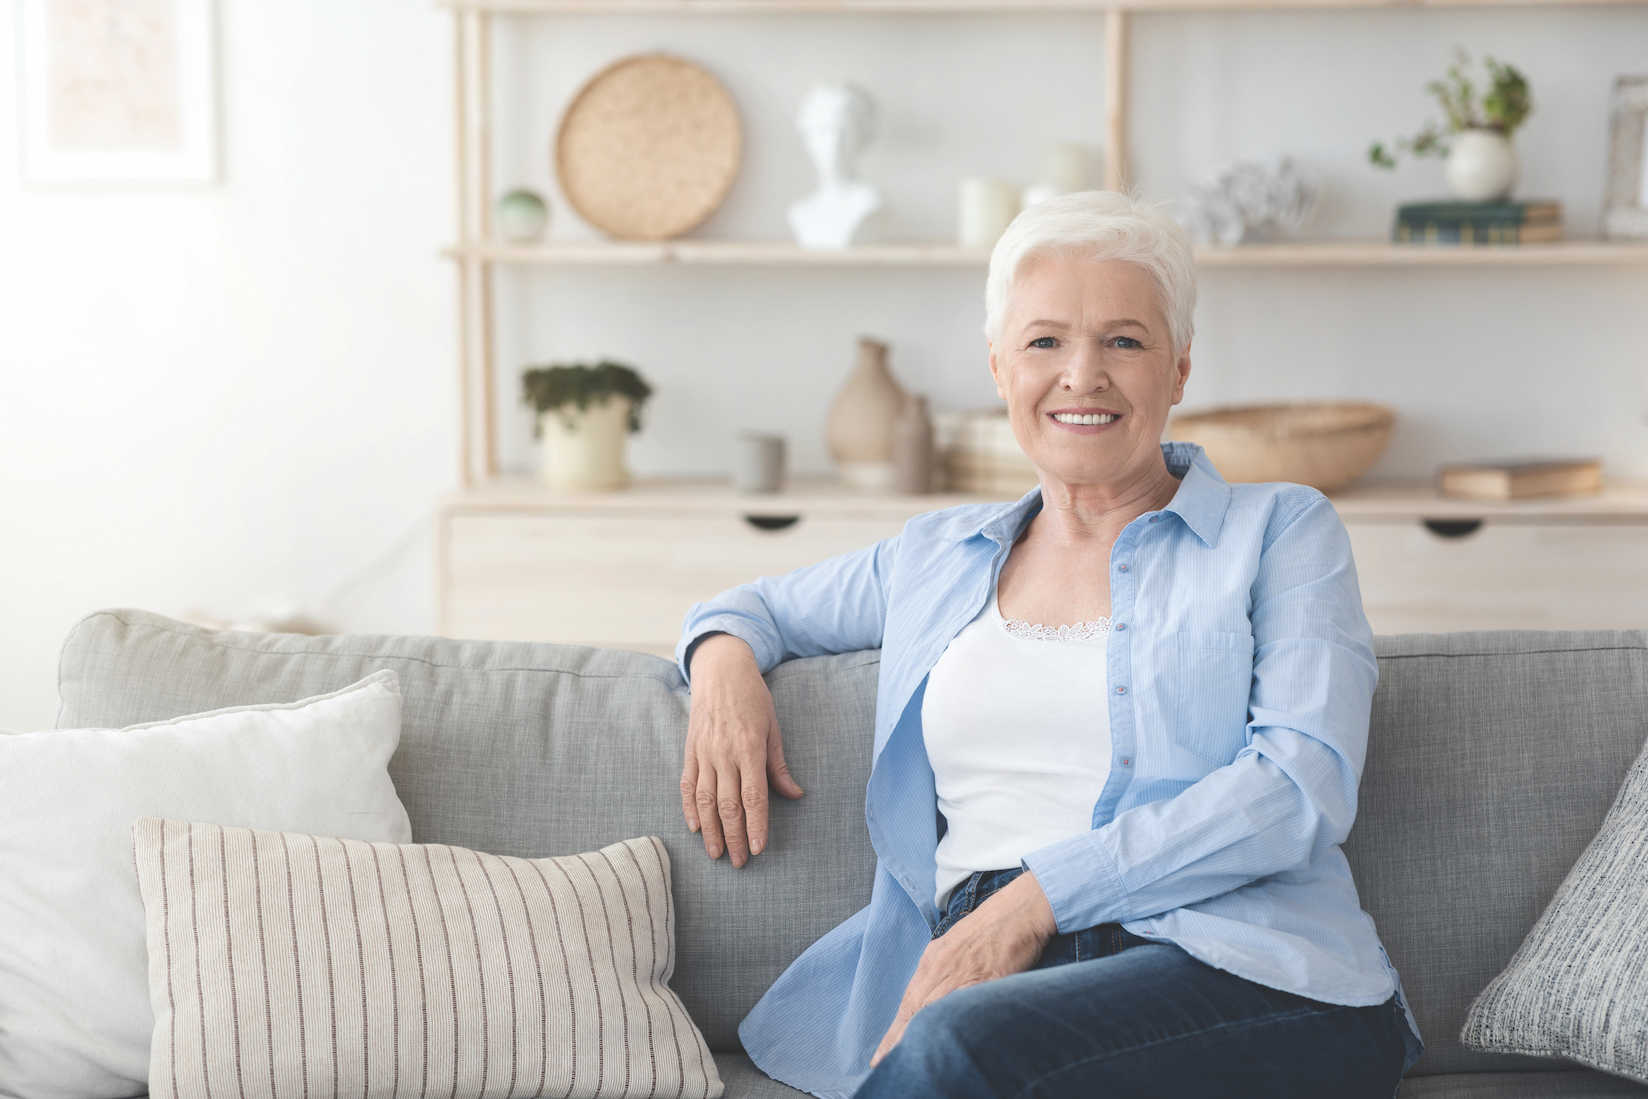 Relaxed Elderly Woman Posing On Couch